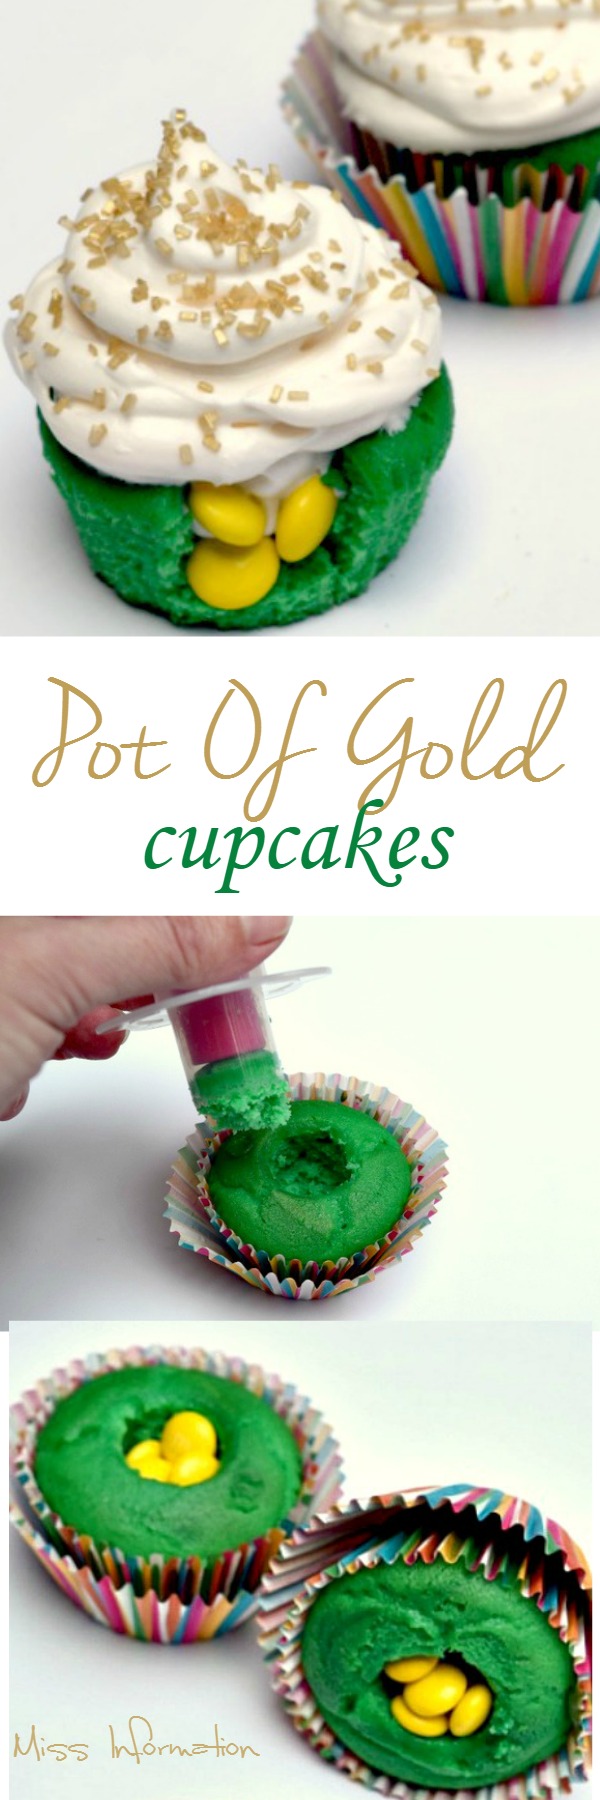 St. Patrick's Day Cupcakes - Smarties Pot of Gold